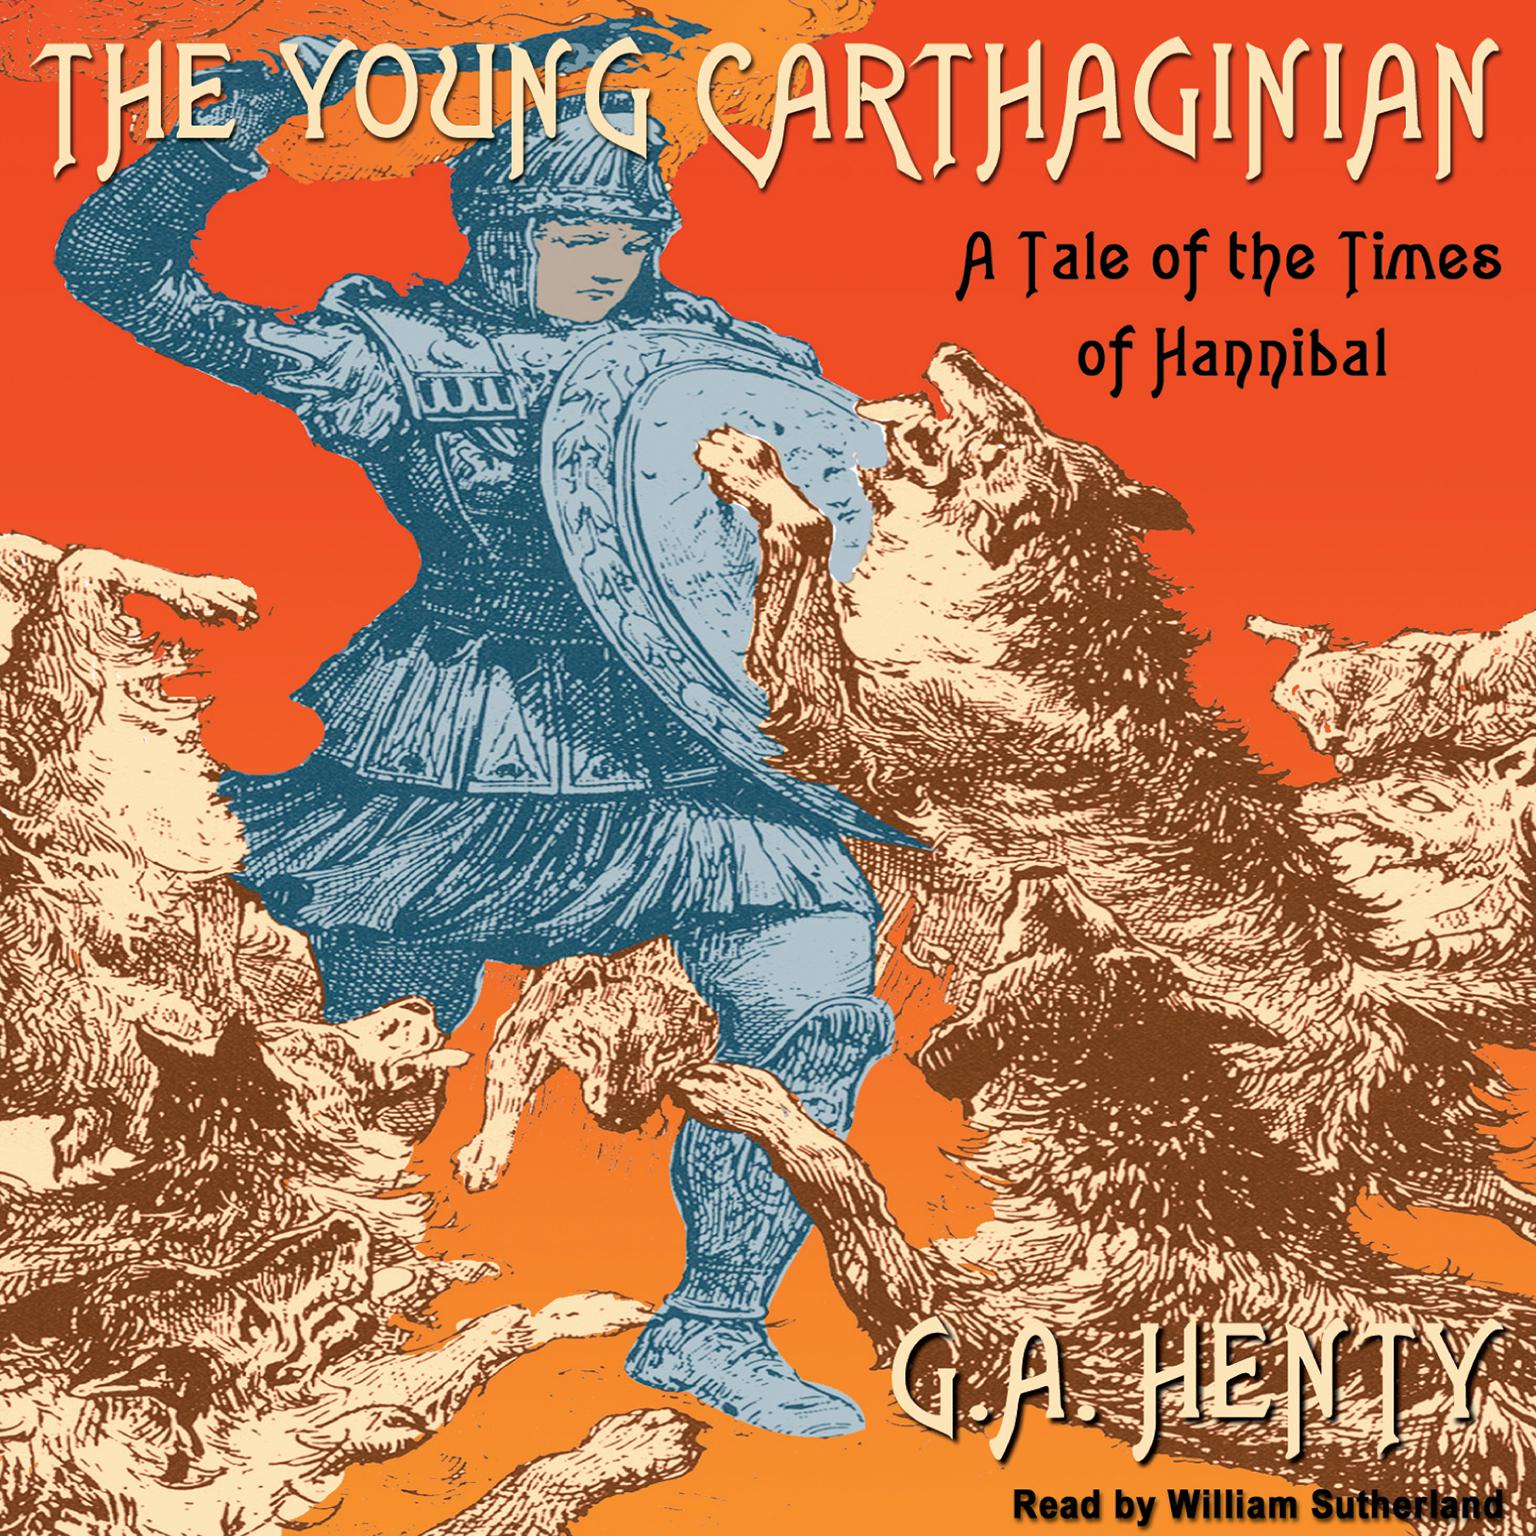 The Young Carthaginian: A Tale of the Times of Hannibal Audiobook, by G. A. Henty